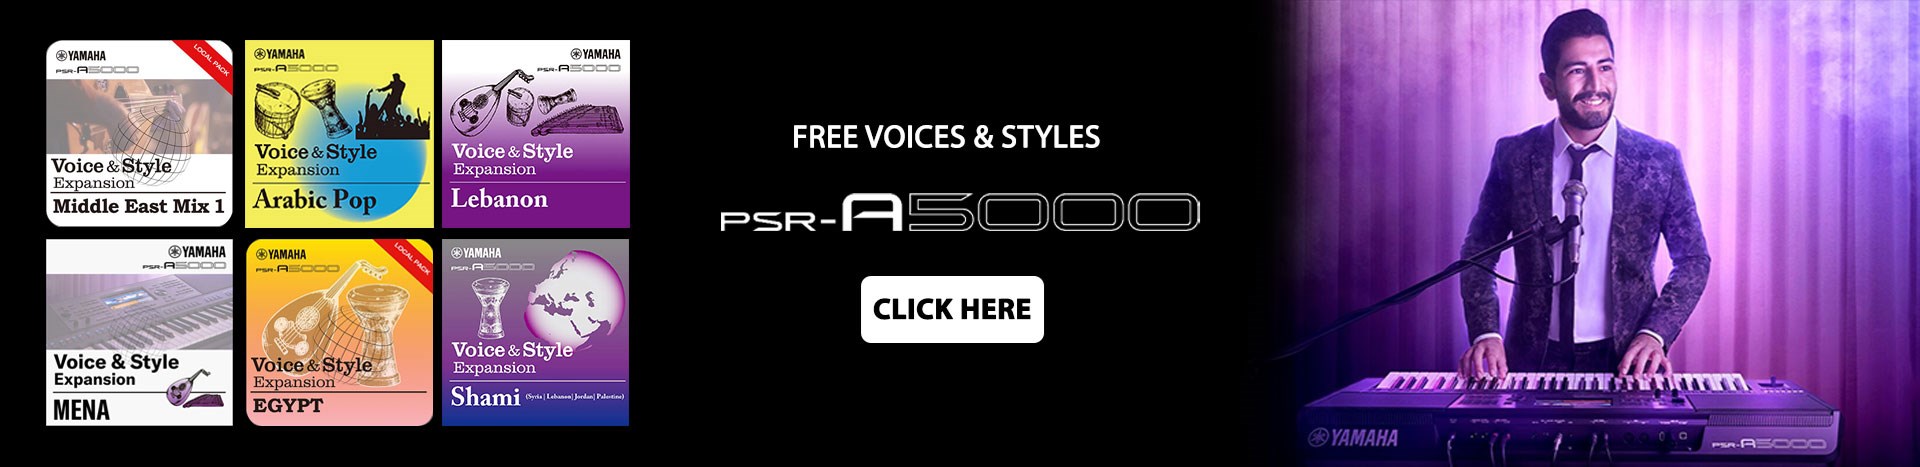 PSR-A5000 free voices and styles